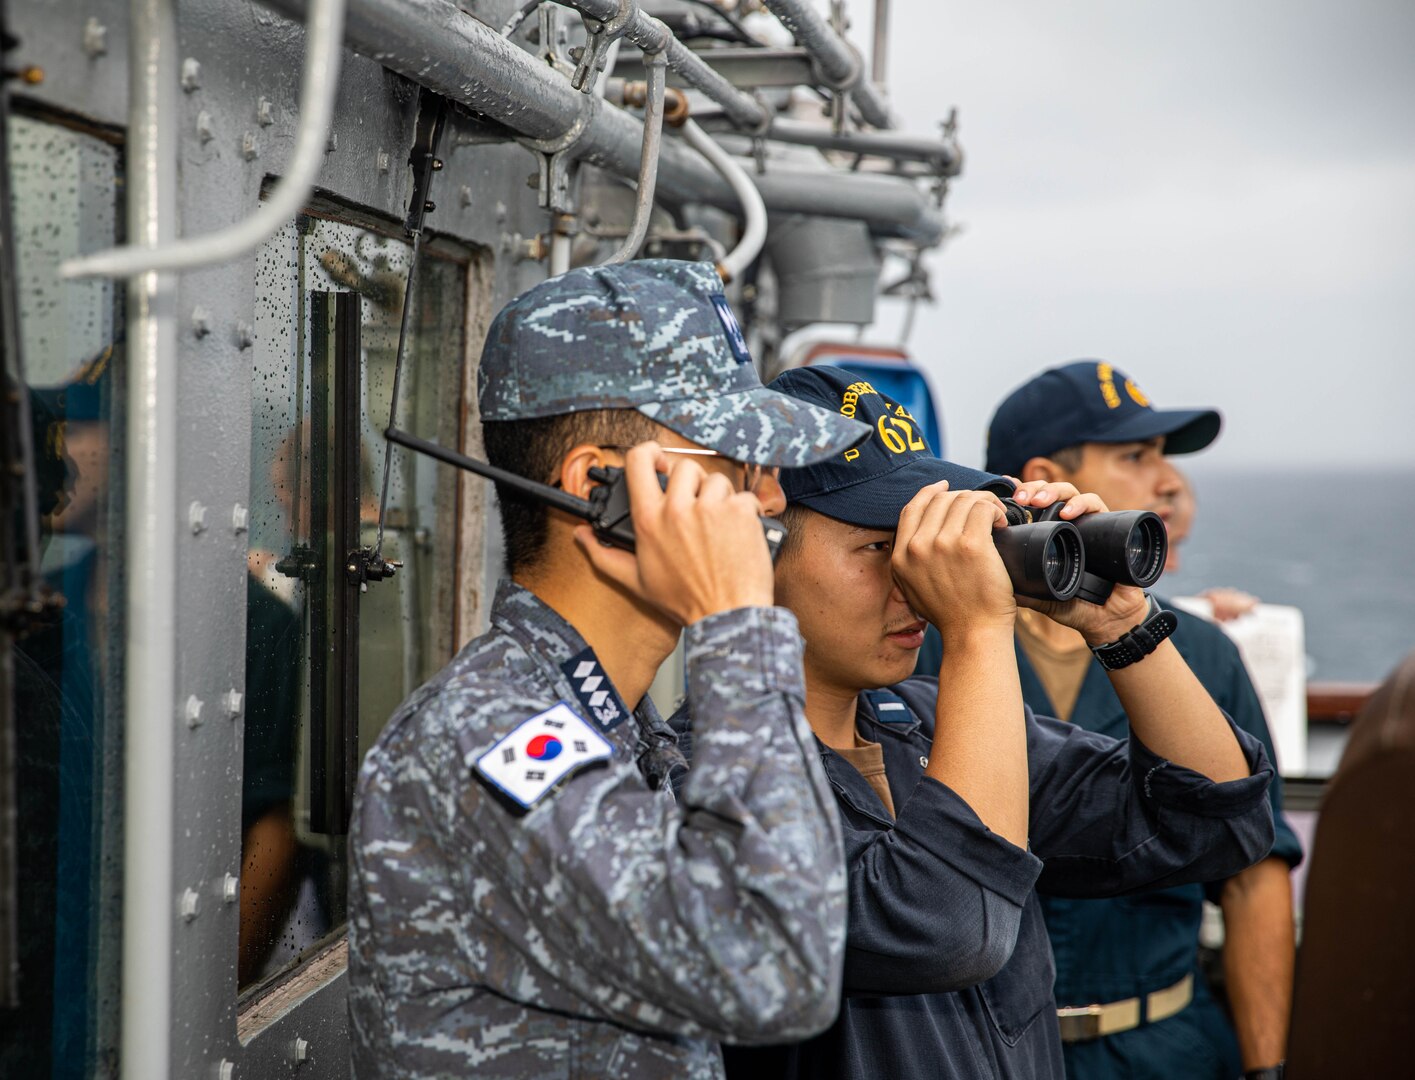 Lt. j.g. Jung Kim, from San Ramon, California observes a replenishment-at-sea with Lt. Jeong Woo Jin on the bridge aboard Ticonderoga-class guided-missile cruiser USS Robert Smalls (CG 62) during a fueling replenishment-at-sea with first-in-class fast-combat support ship ROKS Cheonji (AOE 57), Sept. 26. Robert Smalls is assigned to Commander, Task Force 70 and is participating in a multi-domain bilateral exercise with the Republic of Korea Navy in the U.S. 7th Fleet area of operations. The exercise is taking place near the 70th anniversary of the U.S. and Republic of Korea’s Oct. 1, 1953 Mutual Defense Treaty. (U.S. Navy photo by Mass Communication Specialist 2nd Class RuKiyah Mack).